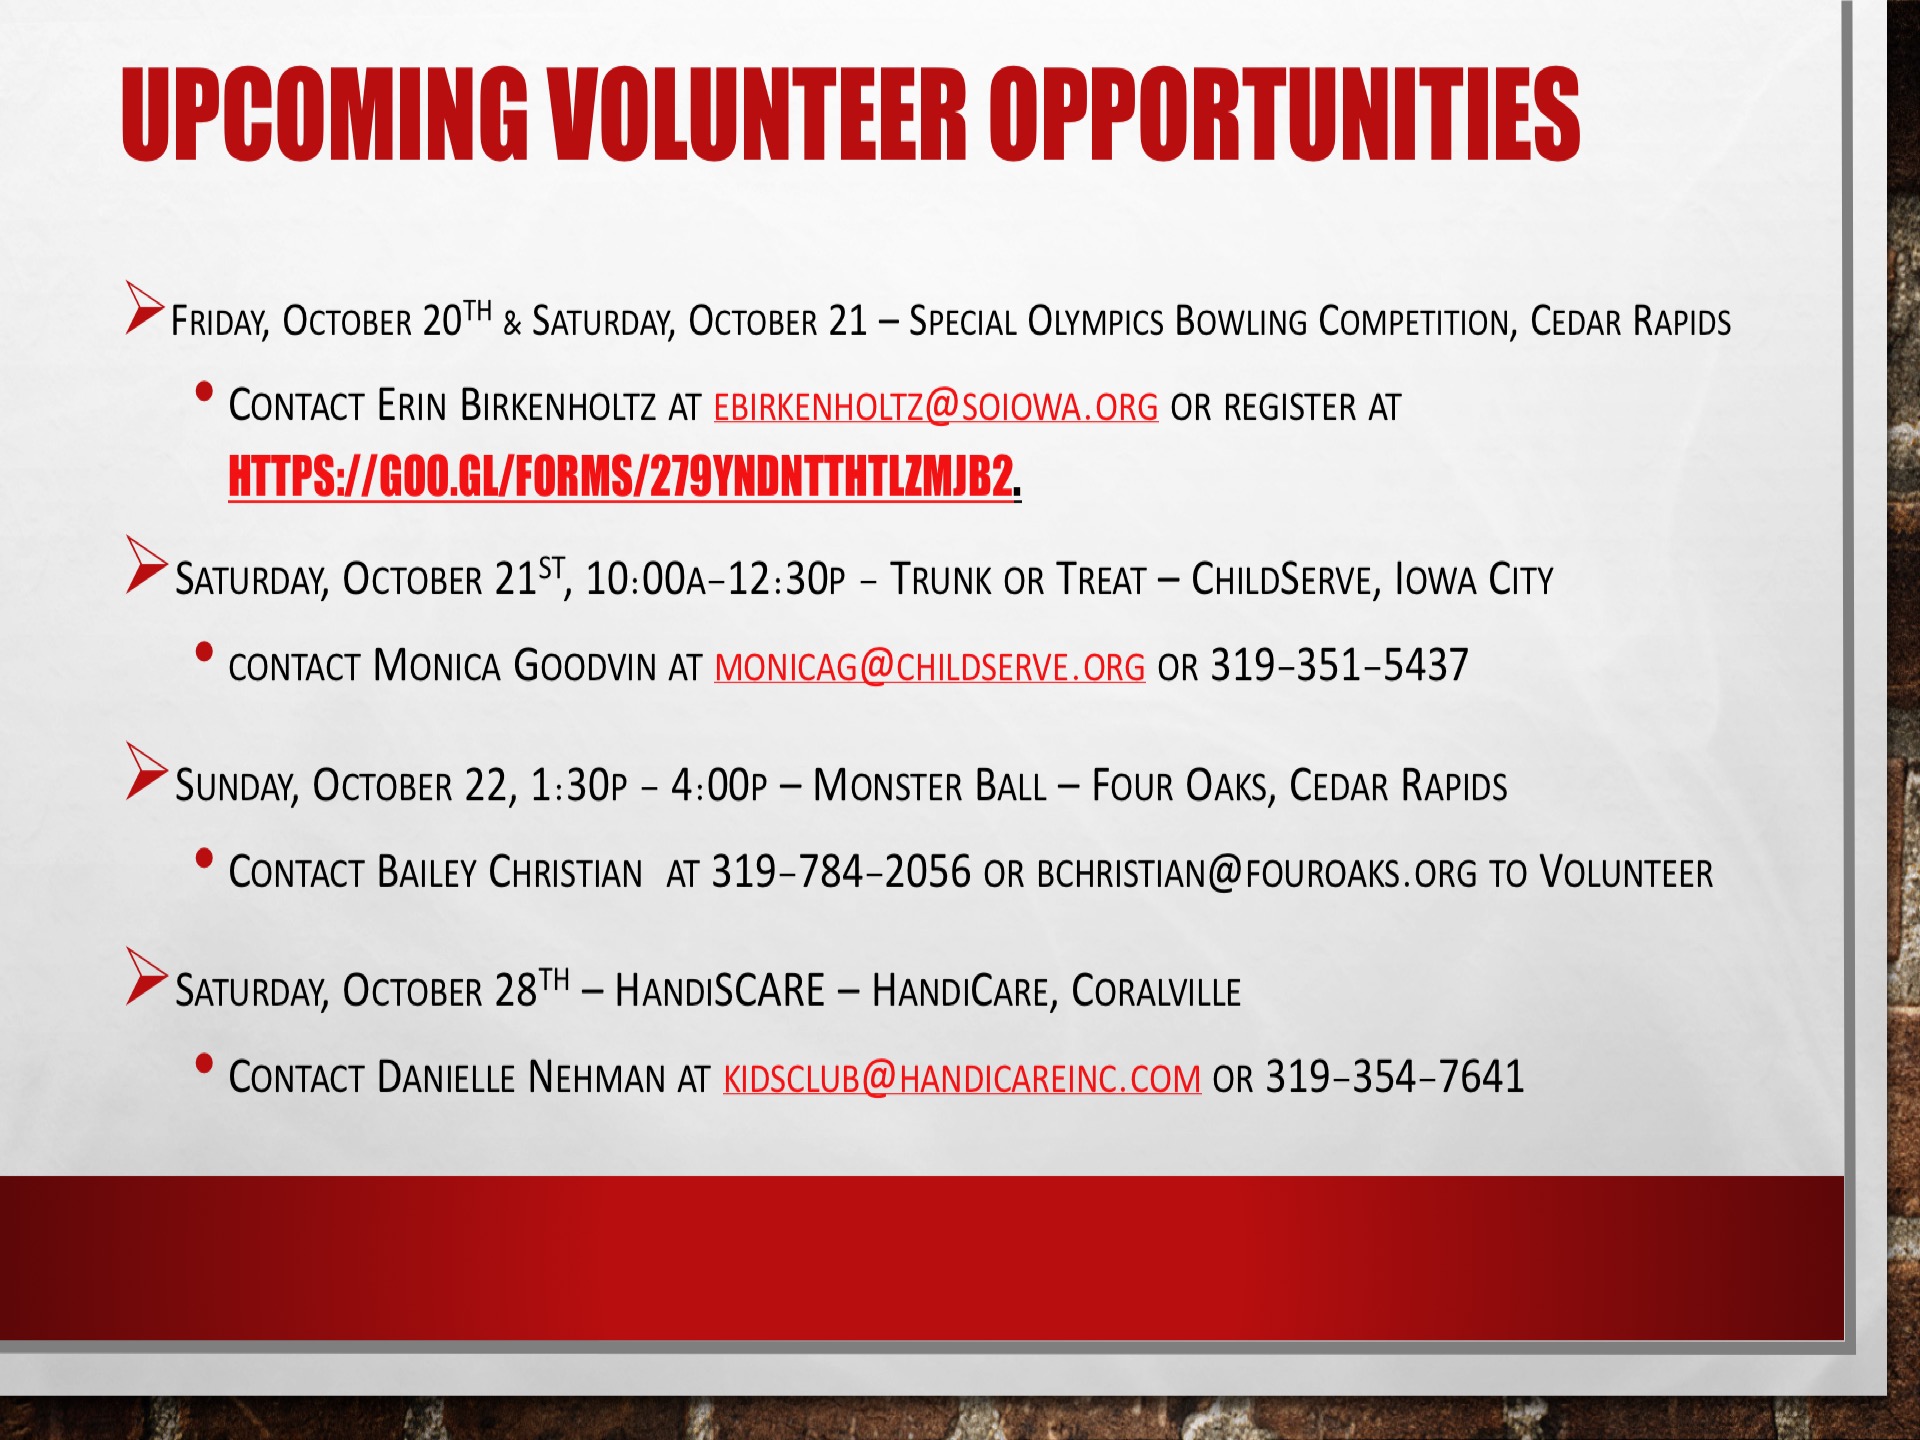 Red background with text describing upcoming volunteer opportunities.